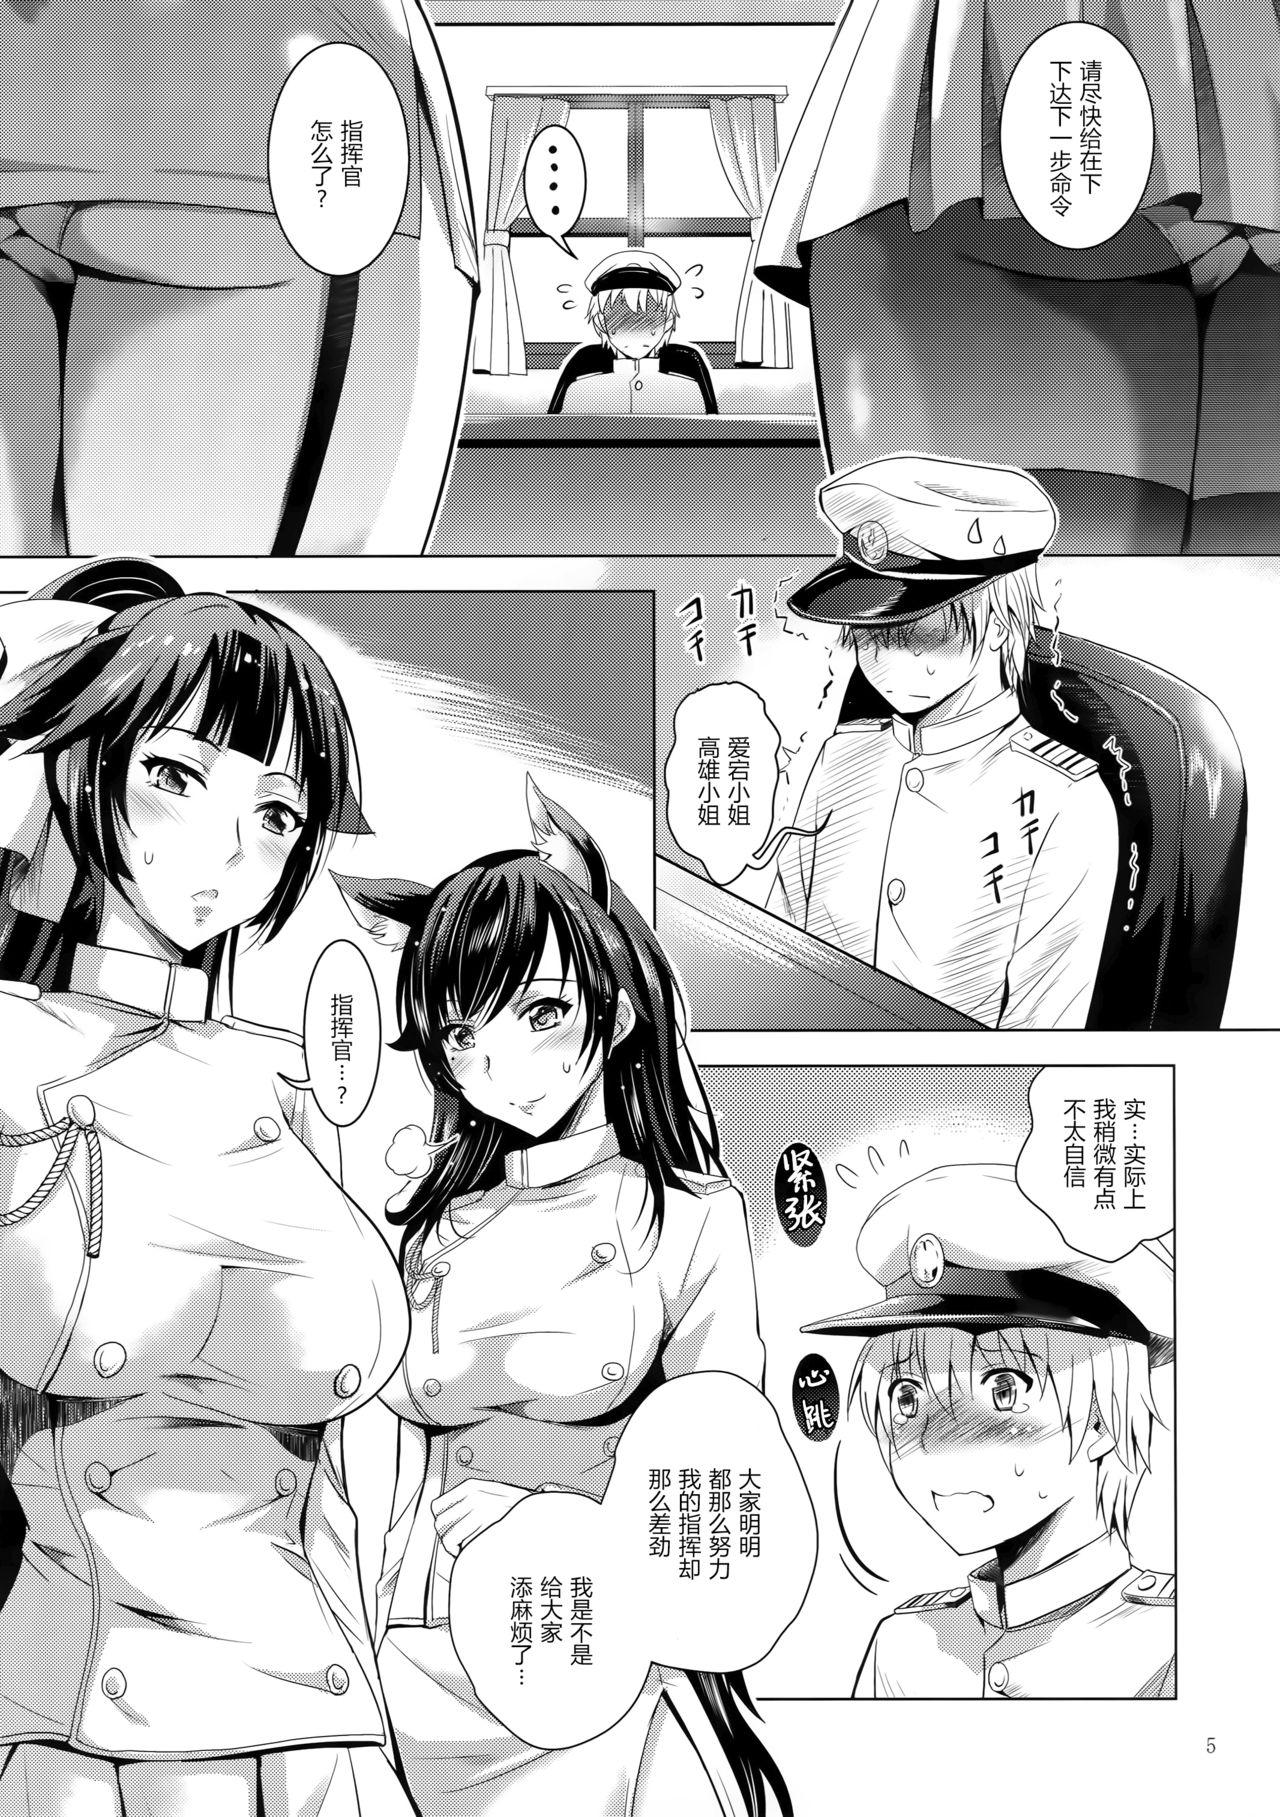 Cocksuckers MOUSOU THEATER 56 - Azur lane Bwc - Page 5